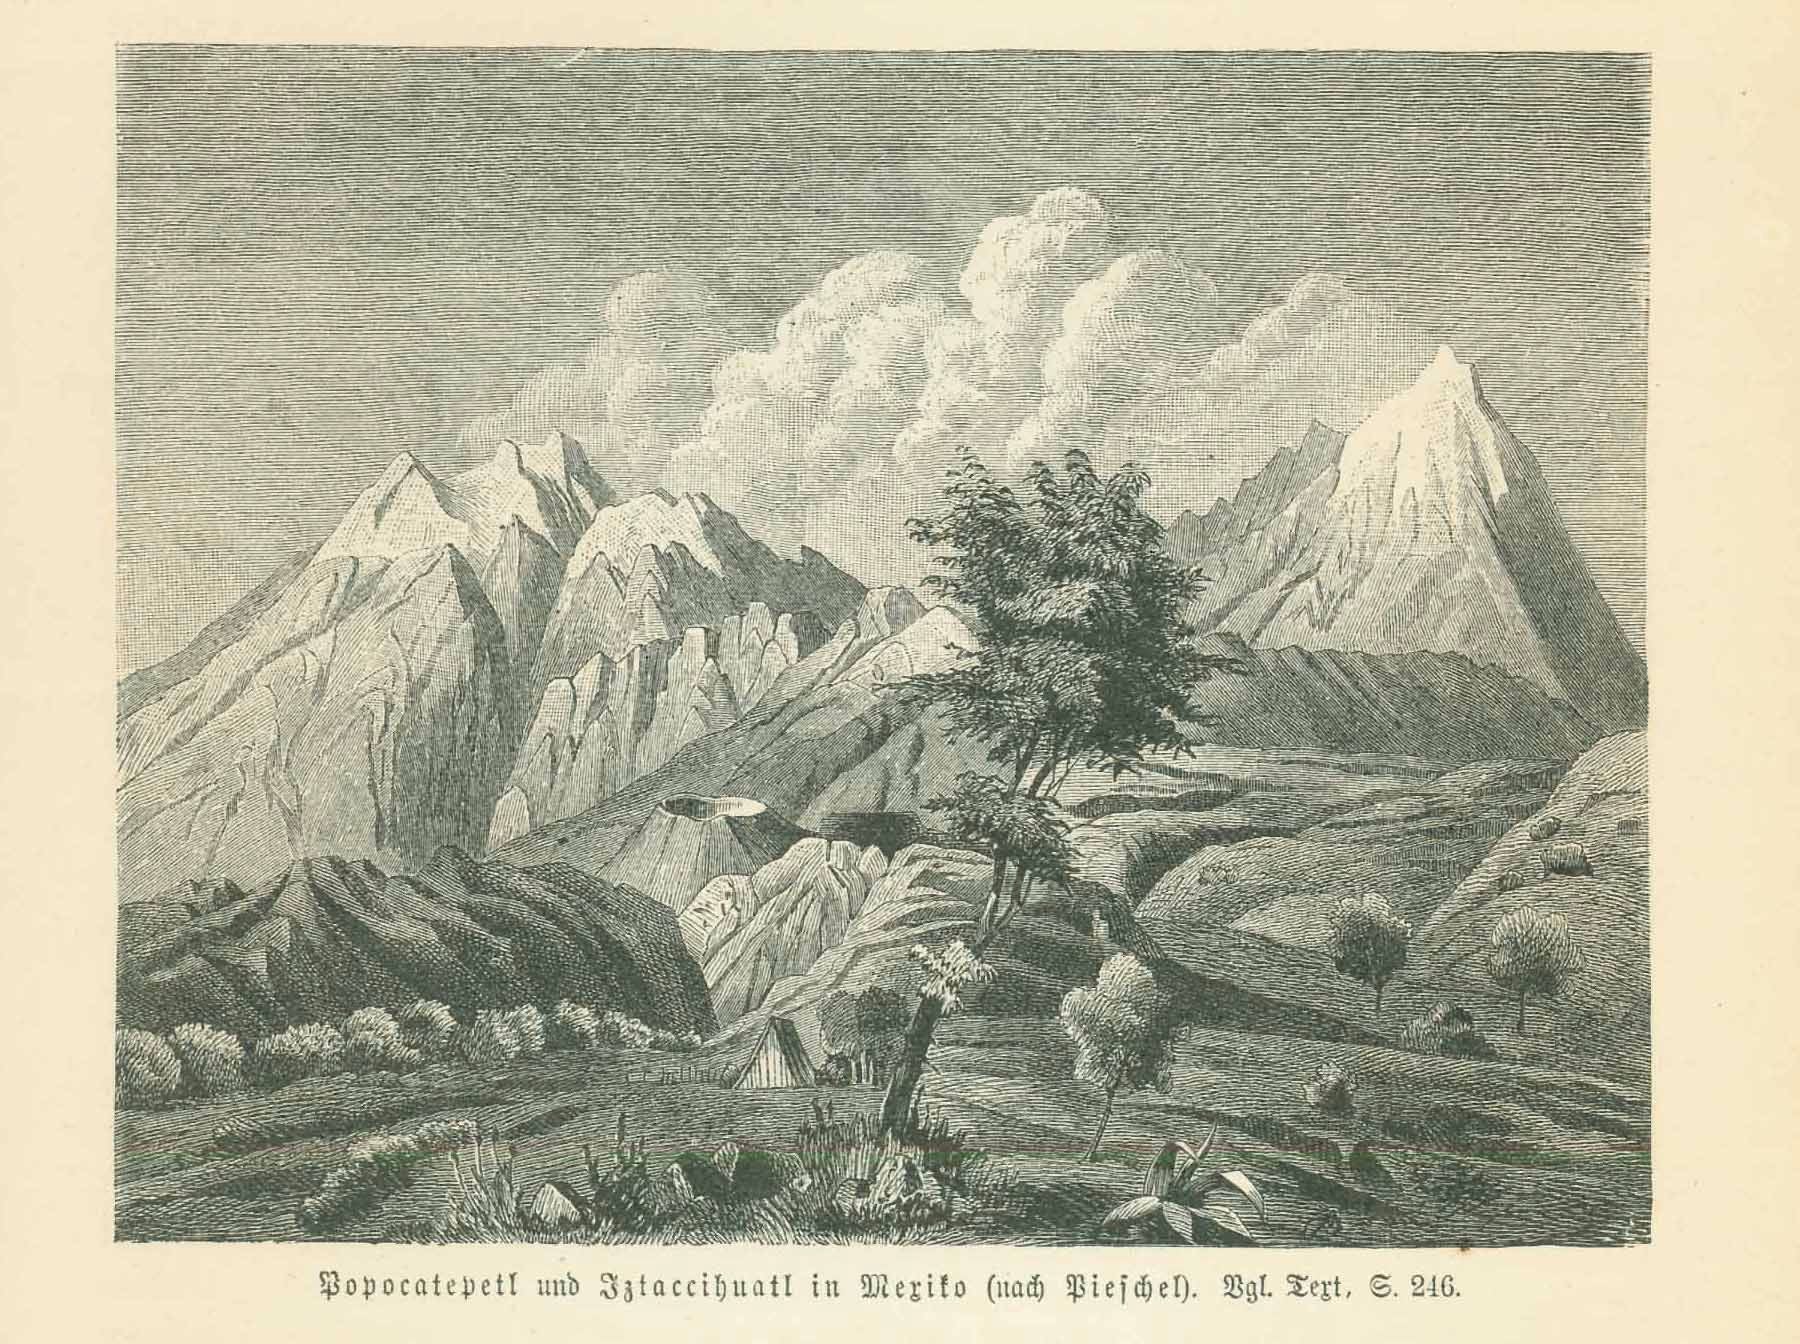 "Popocatepetl und Iztaccihuatl in Mexiko"  Wood engraving on a page of text about Mexico that continues on the  reverse side. On the reverse side is also an image of the volcano Jorullo. Published ca 1885.  Original antique print  